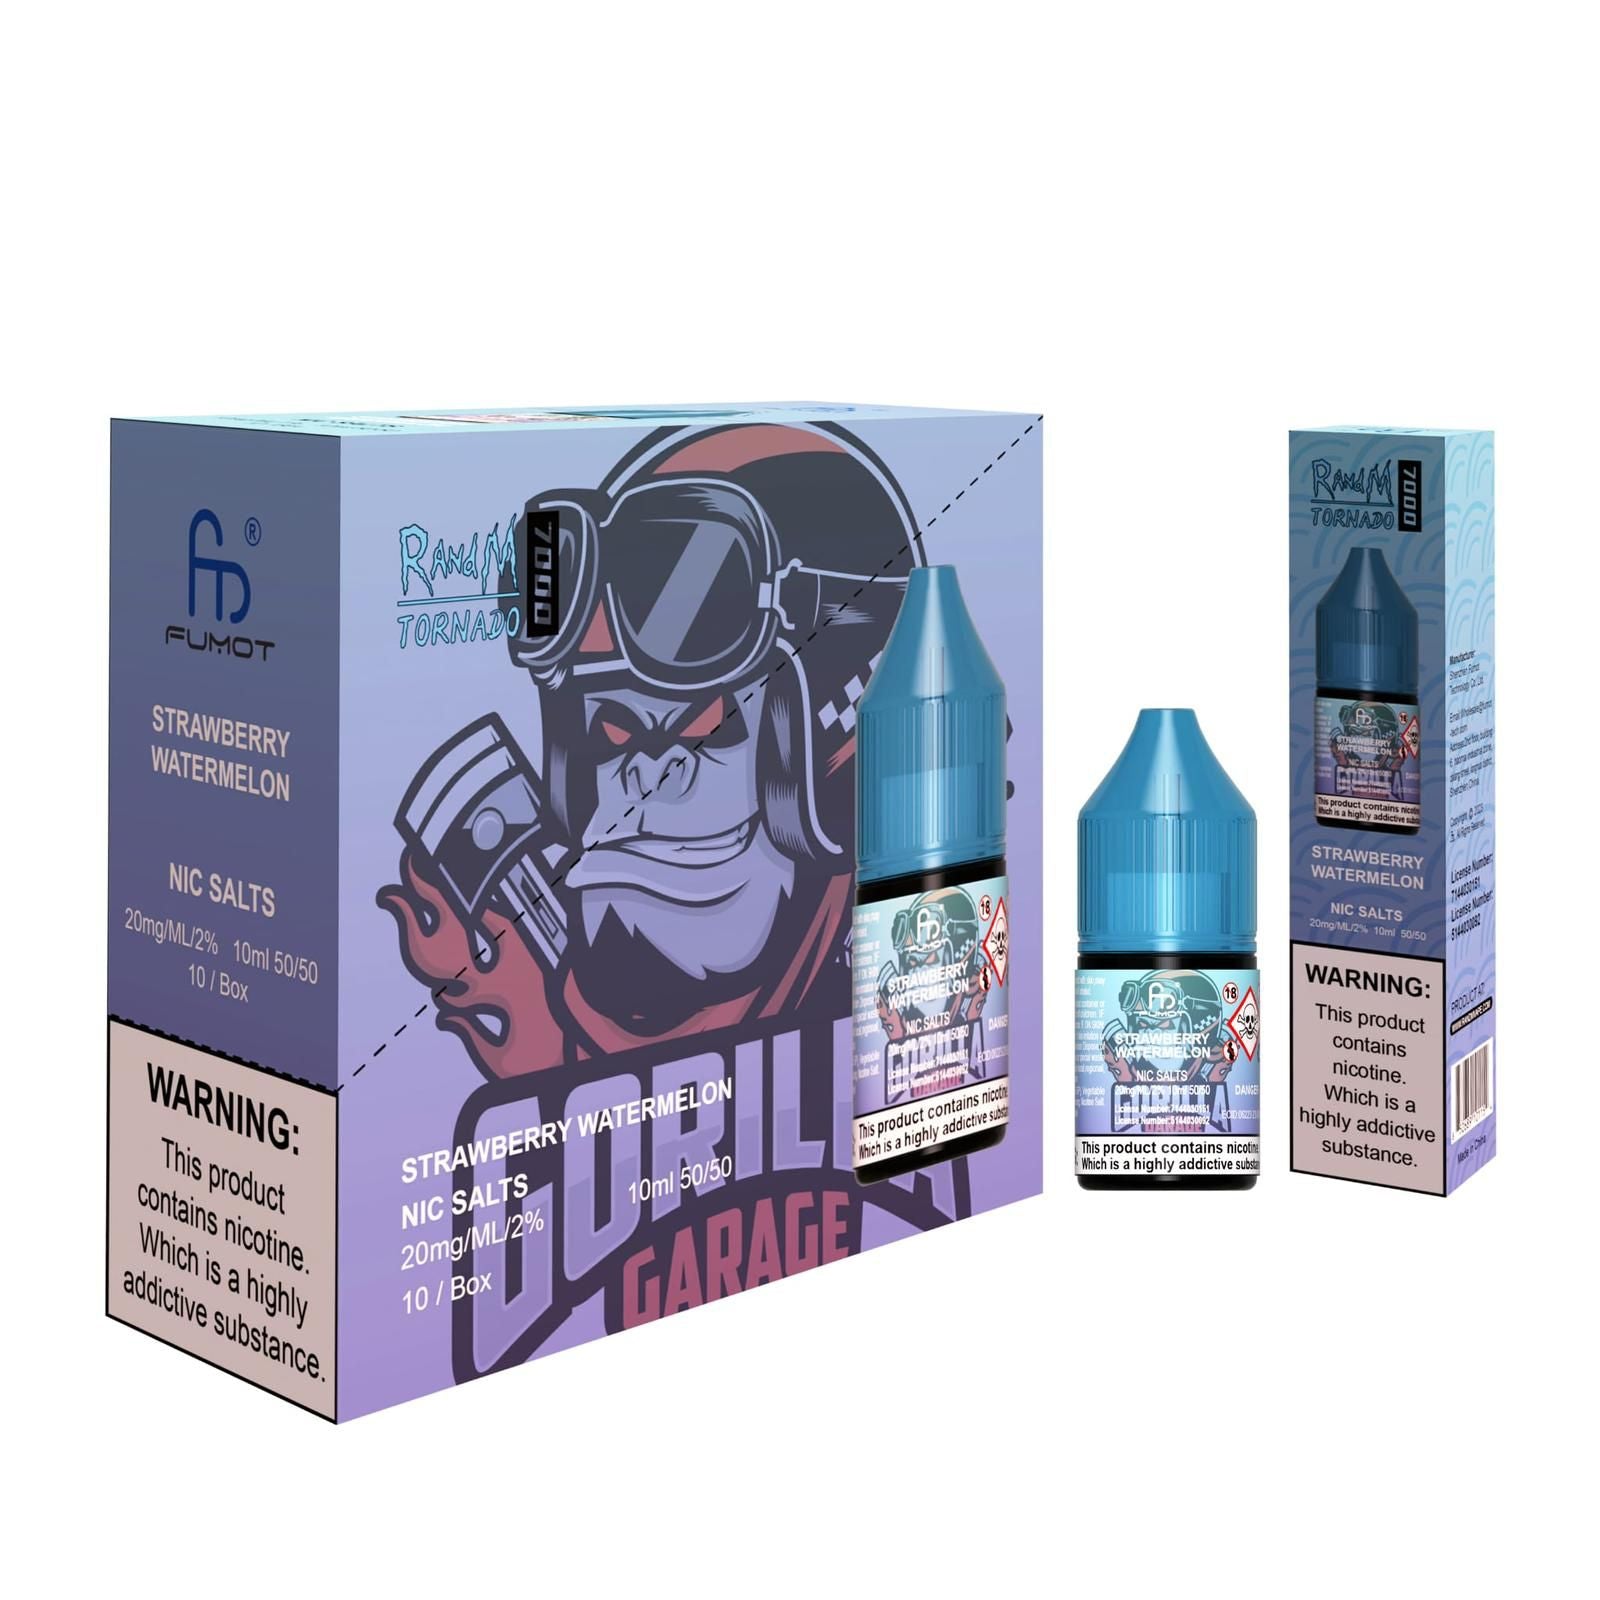 R and M 7000 Nic Salt 10ml - Box of 10 - Wolfvapes.co.uk-Strawberry Watermelon